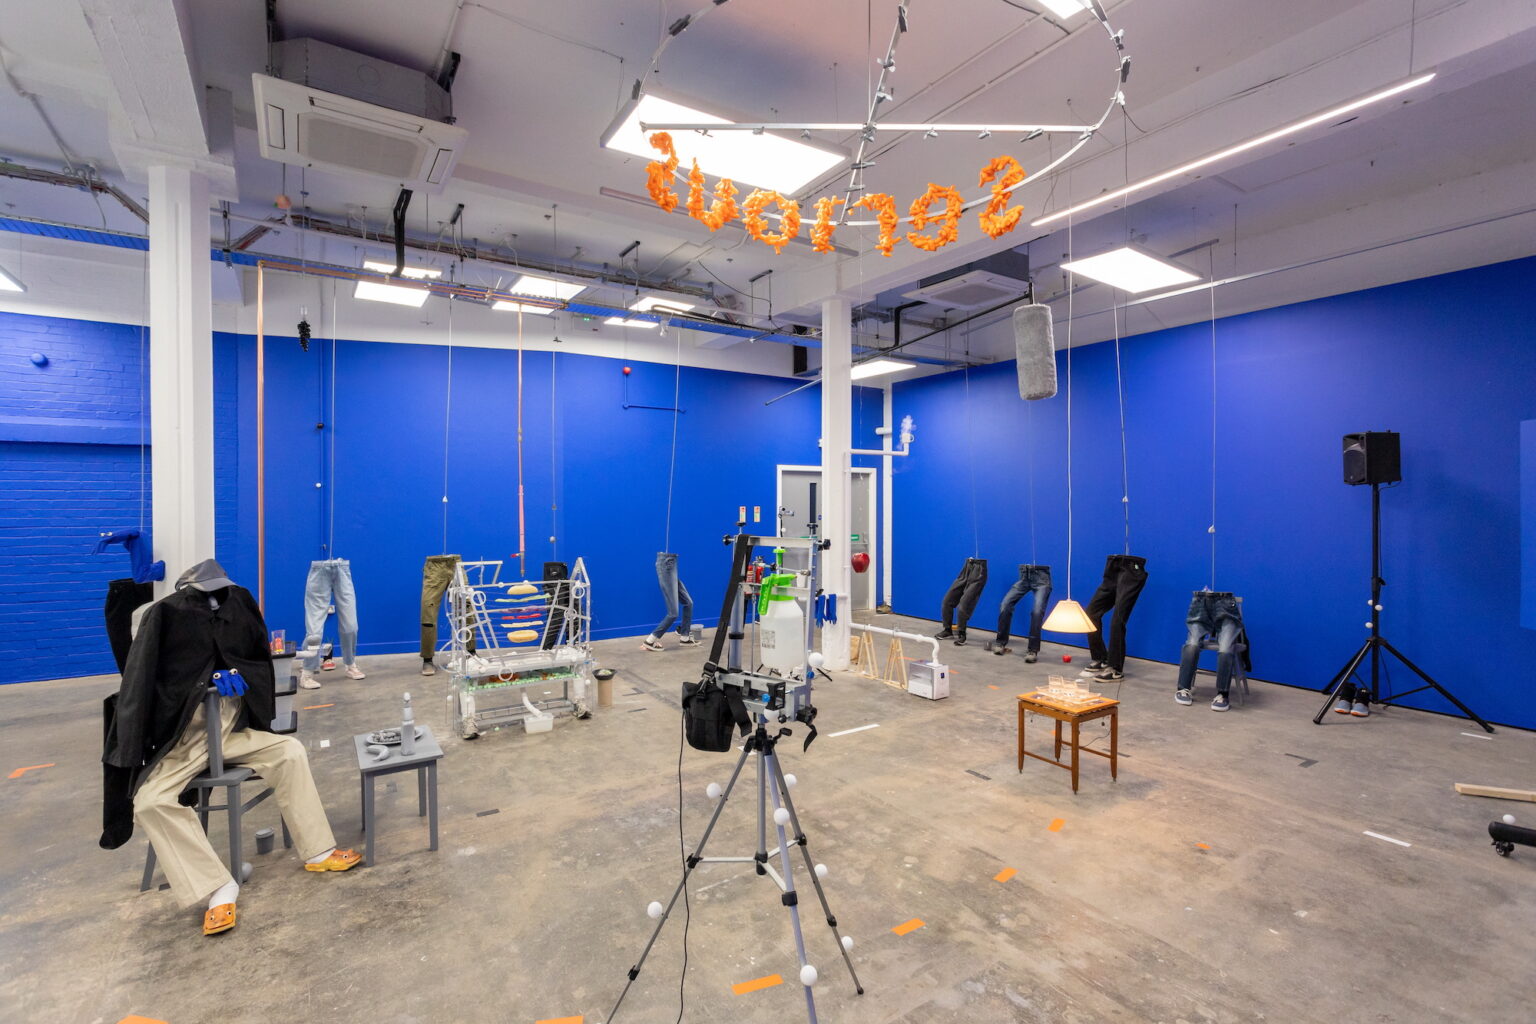 A view of a gallery space with blue walls and concrete floors and multiple artworks that resemble a film set